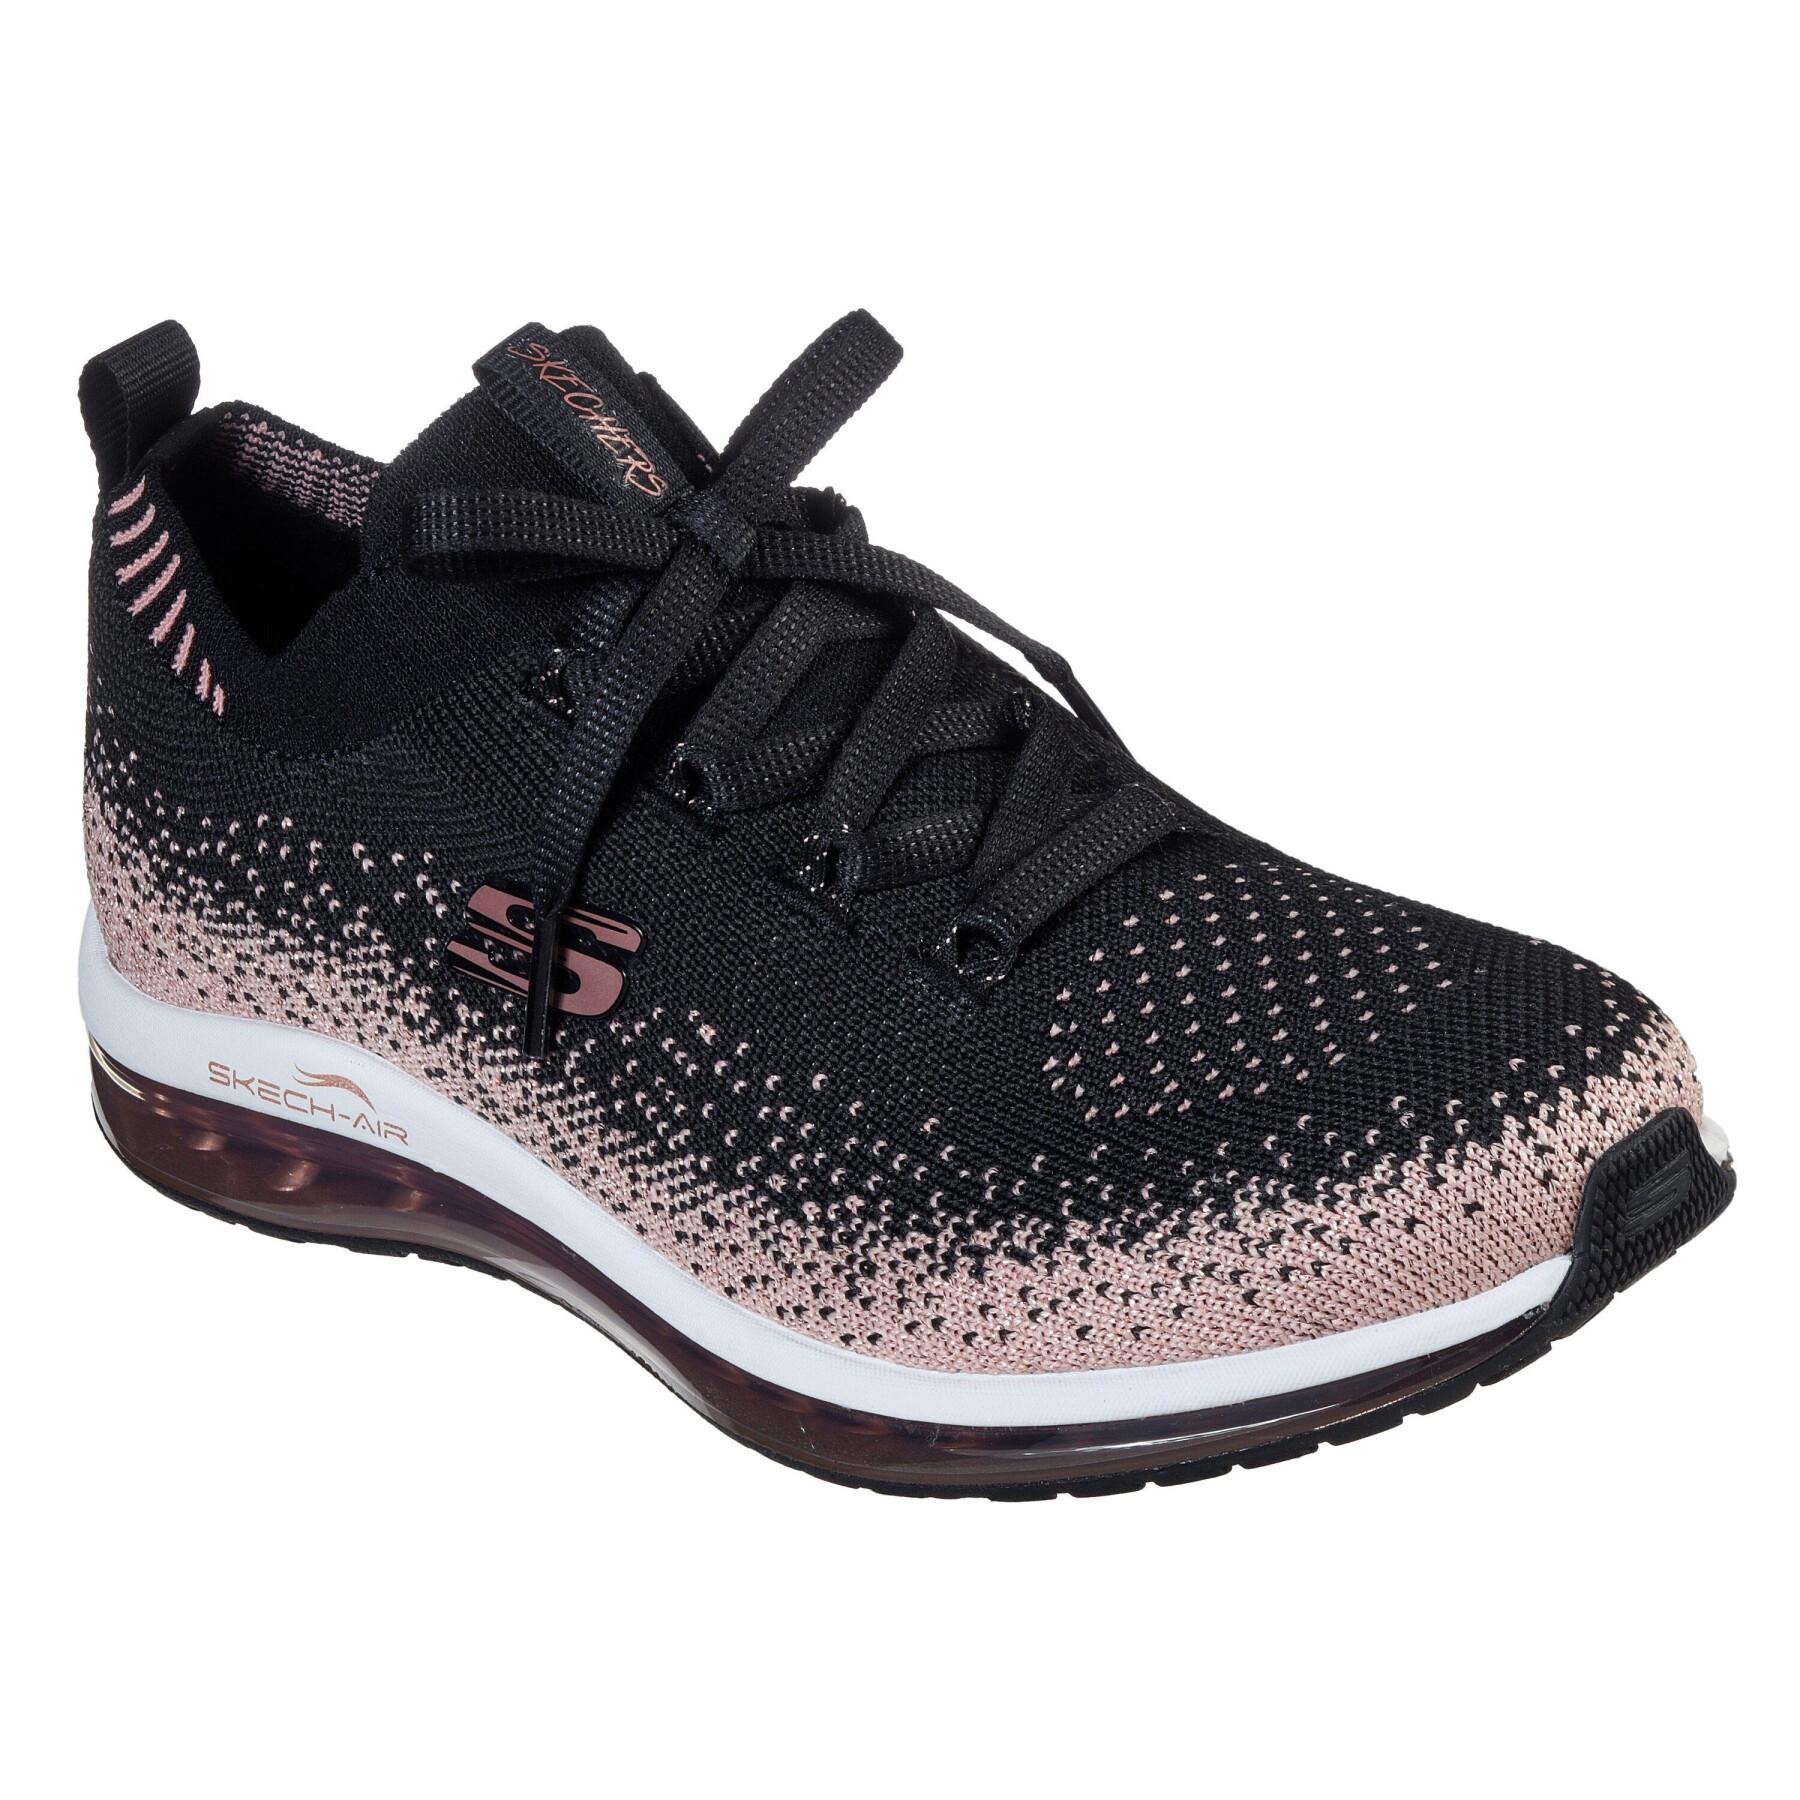 Formadores Skechers Skech-Air Element Sweet Sunset 